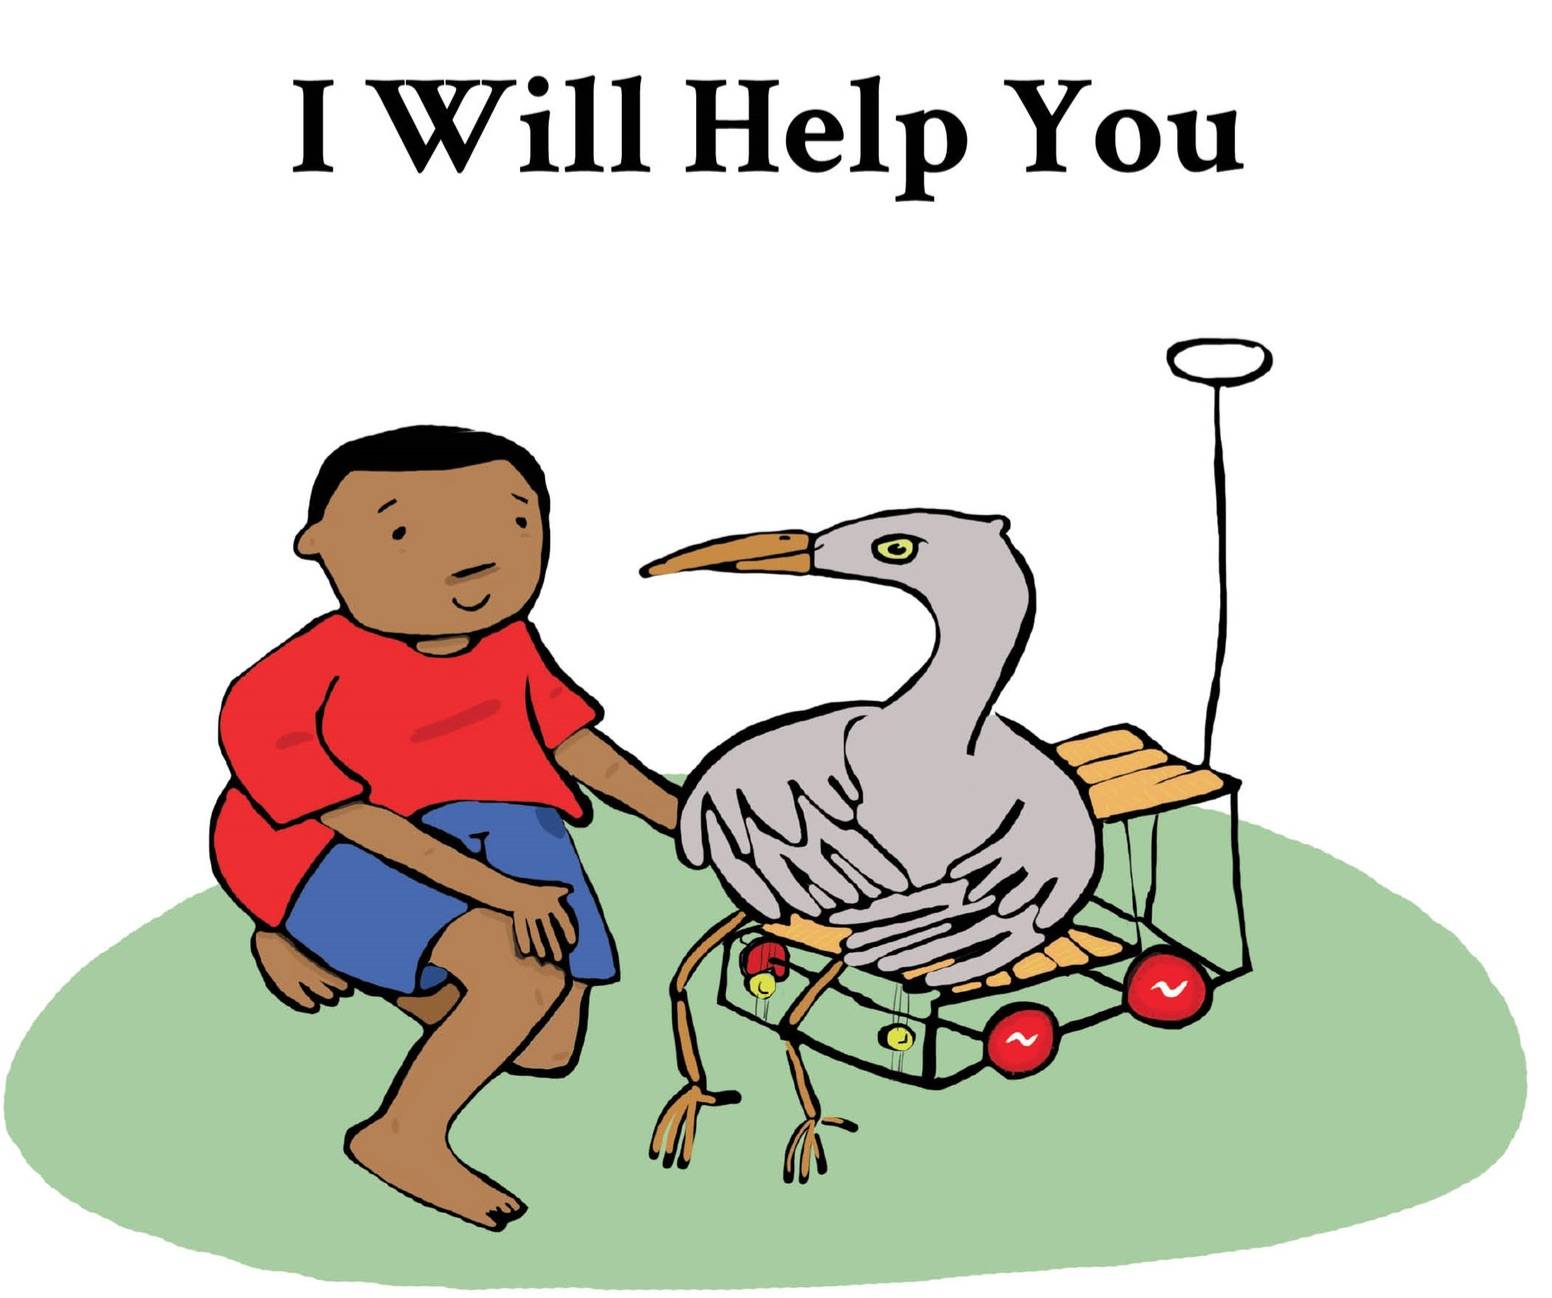 I will help you